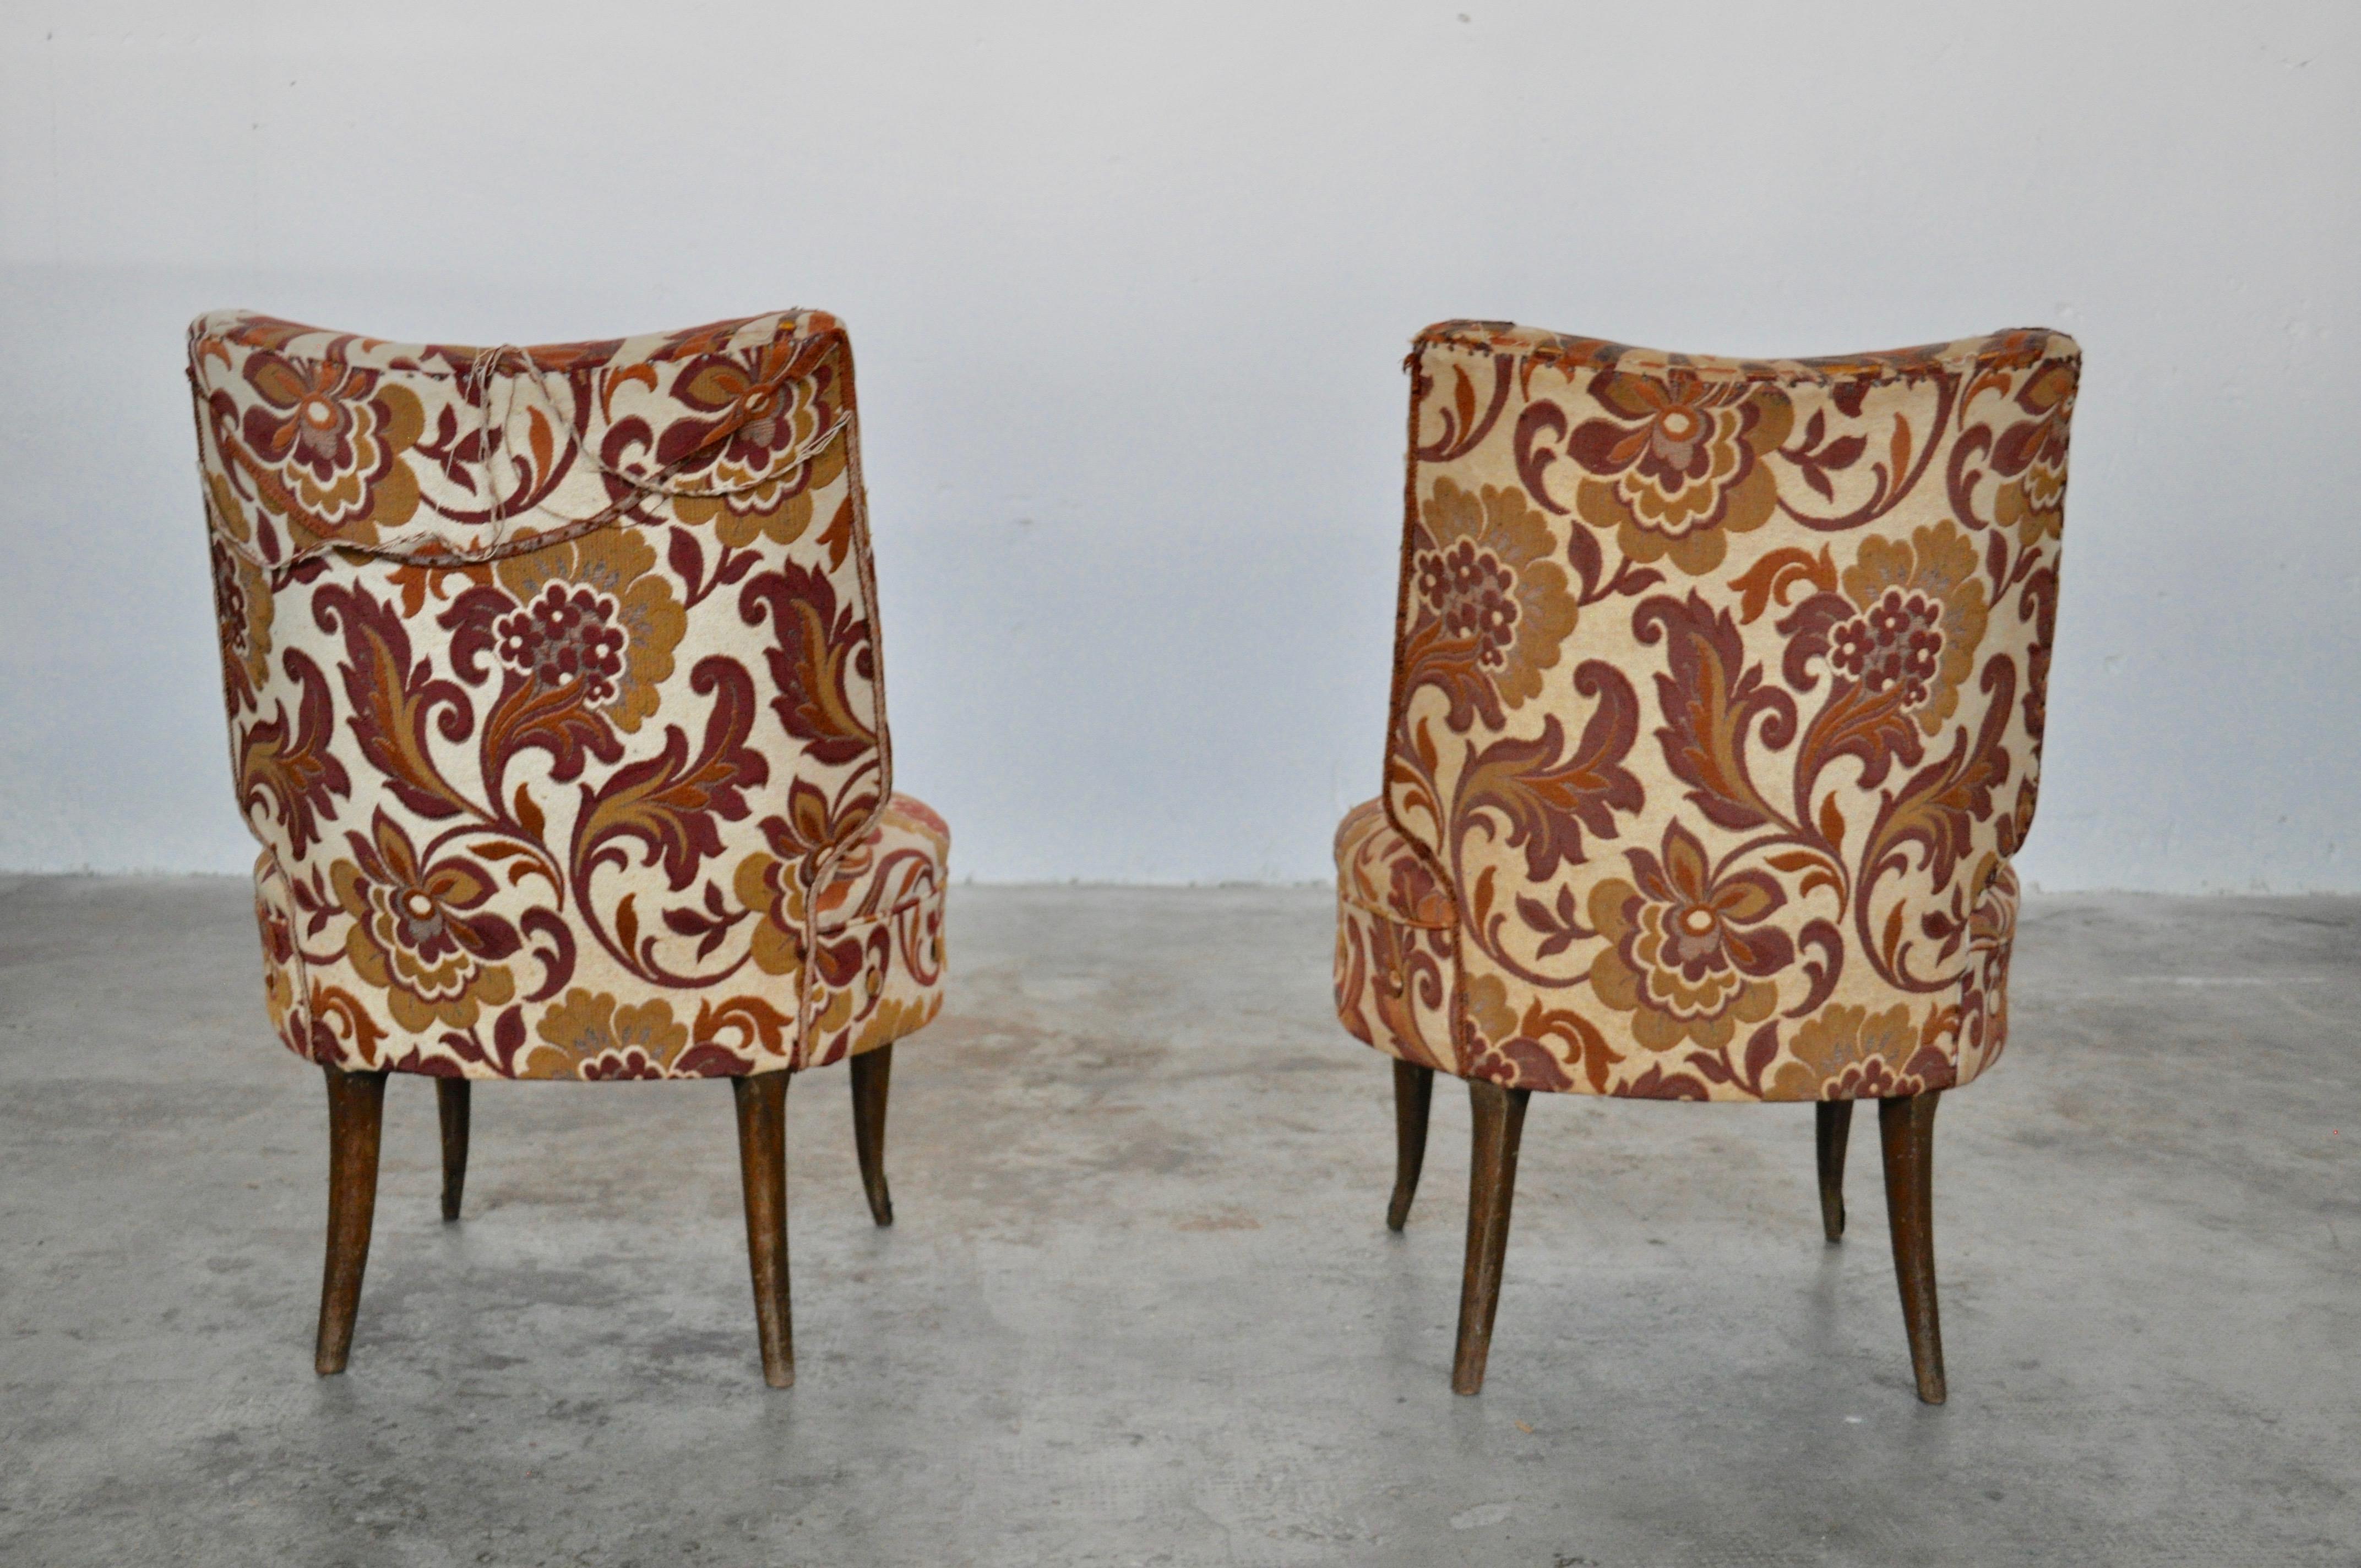 Original Rubelli fabric armchair set, Italy, 1930. Flowered goblain fabric, piping and covered buttons. Walnut structure.

 